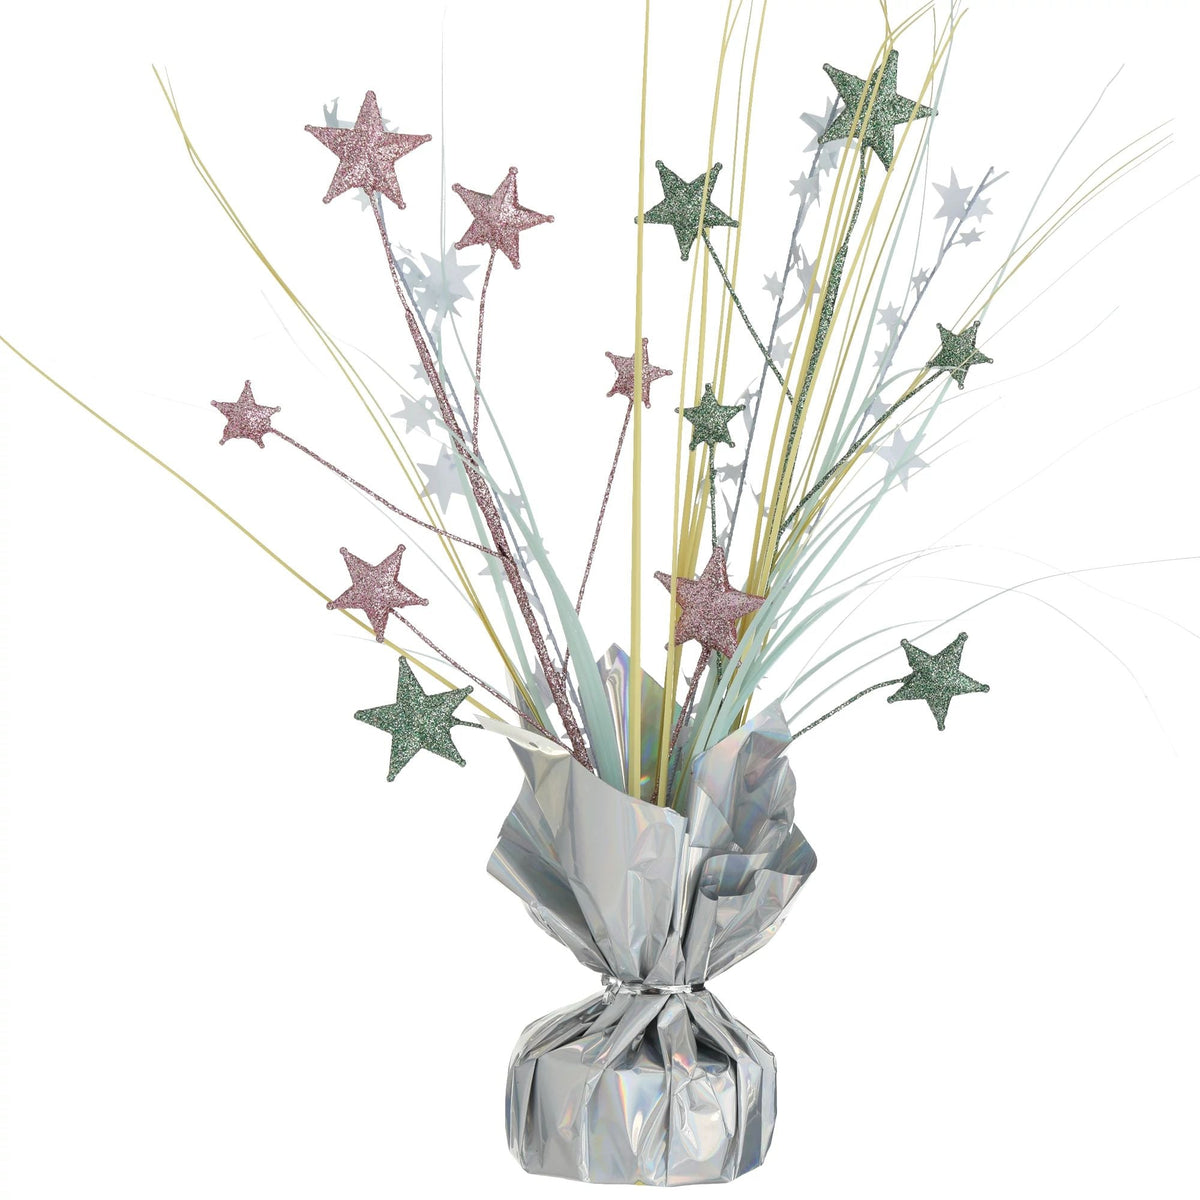 AMSCAN CA Decorations Spray Centerpiece with Stars, Pastel, 12 Inches, 1 Count 192937416419